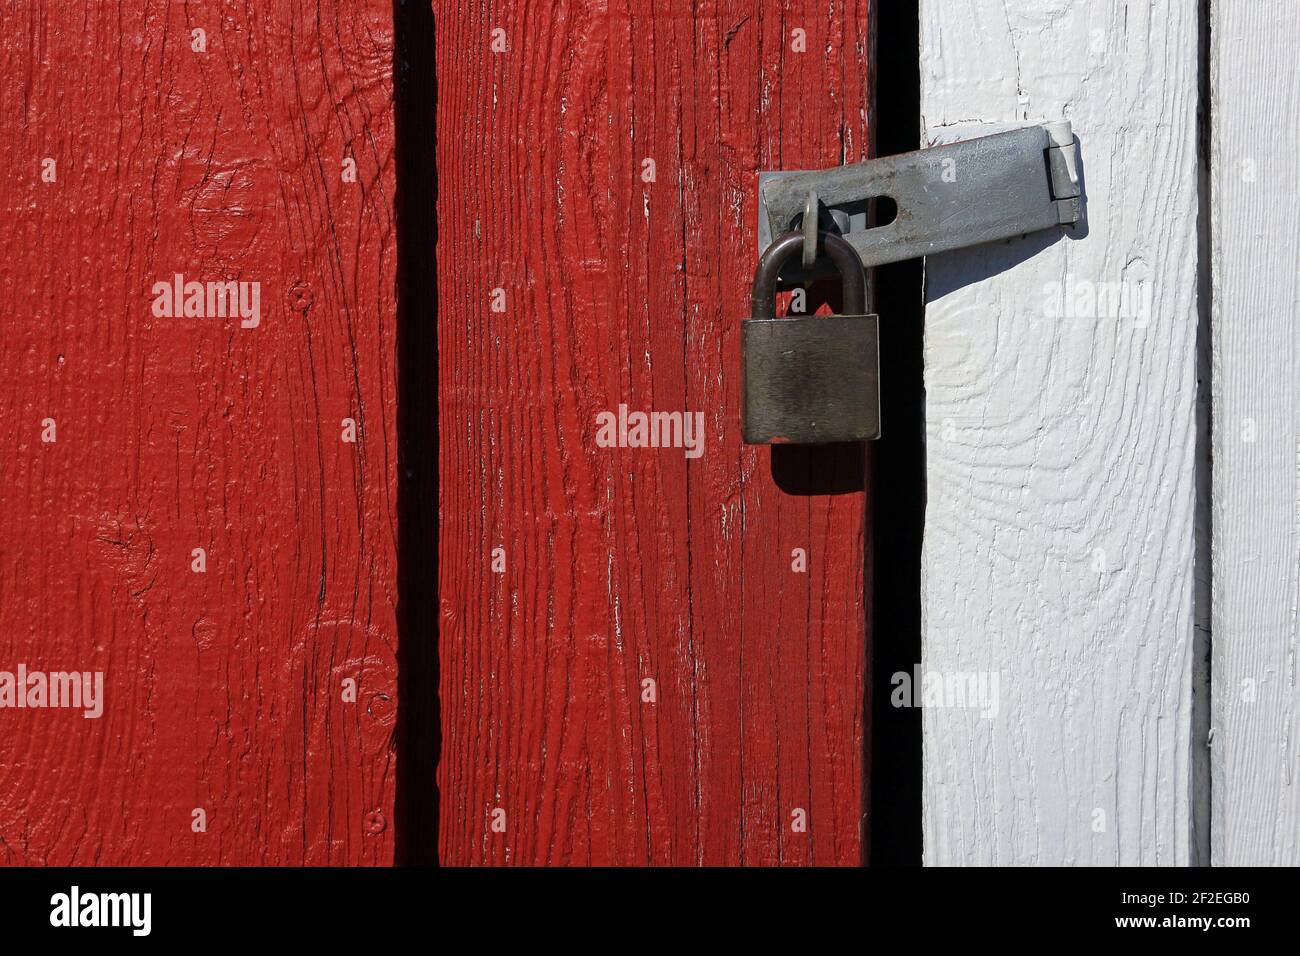 A padlock connecting red and white wooden panels. Stock Photo